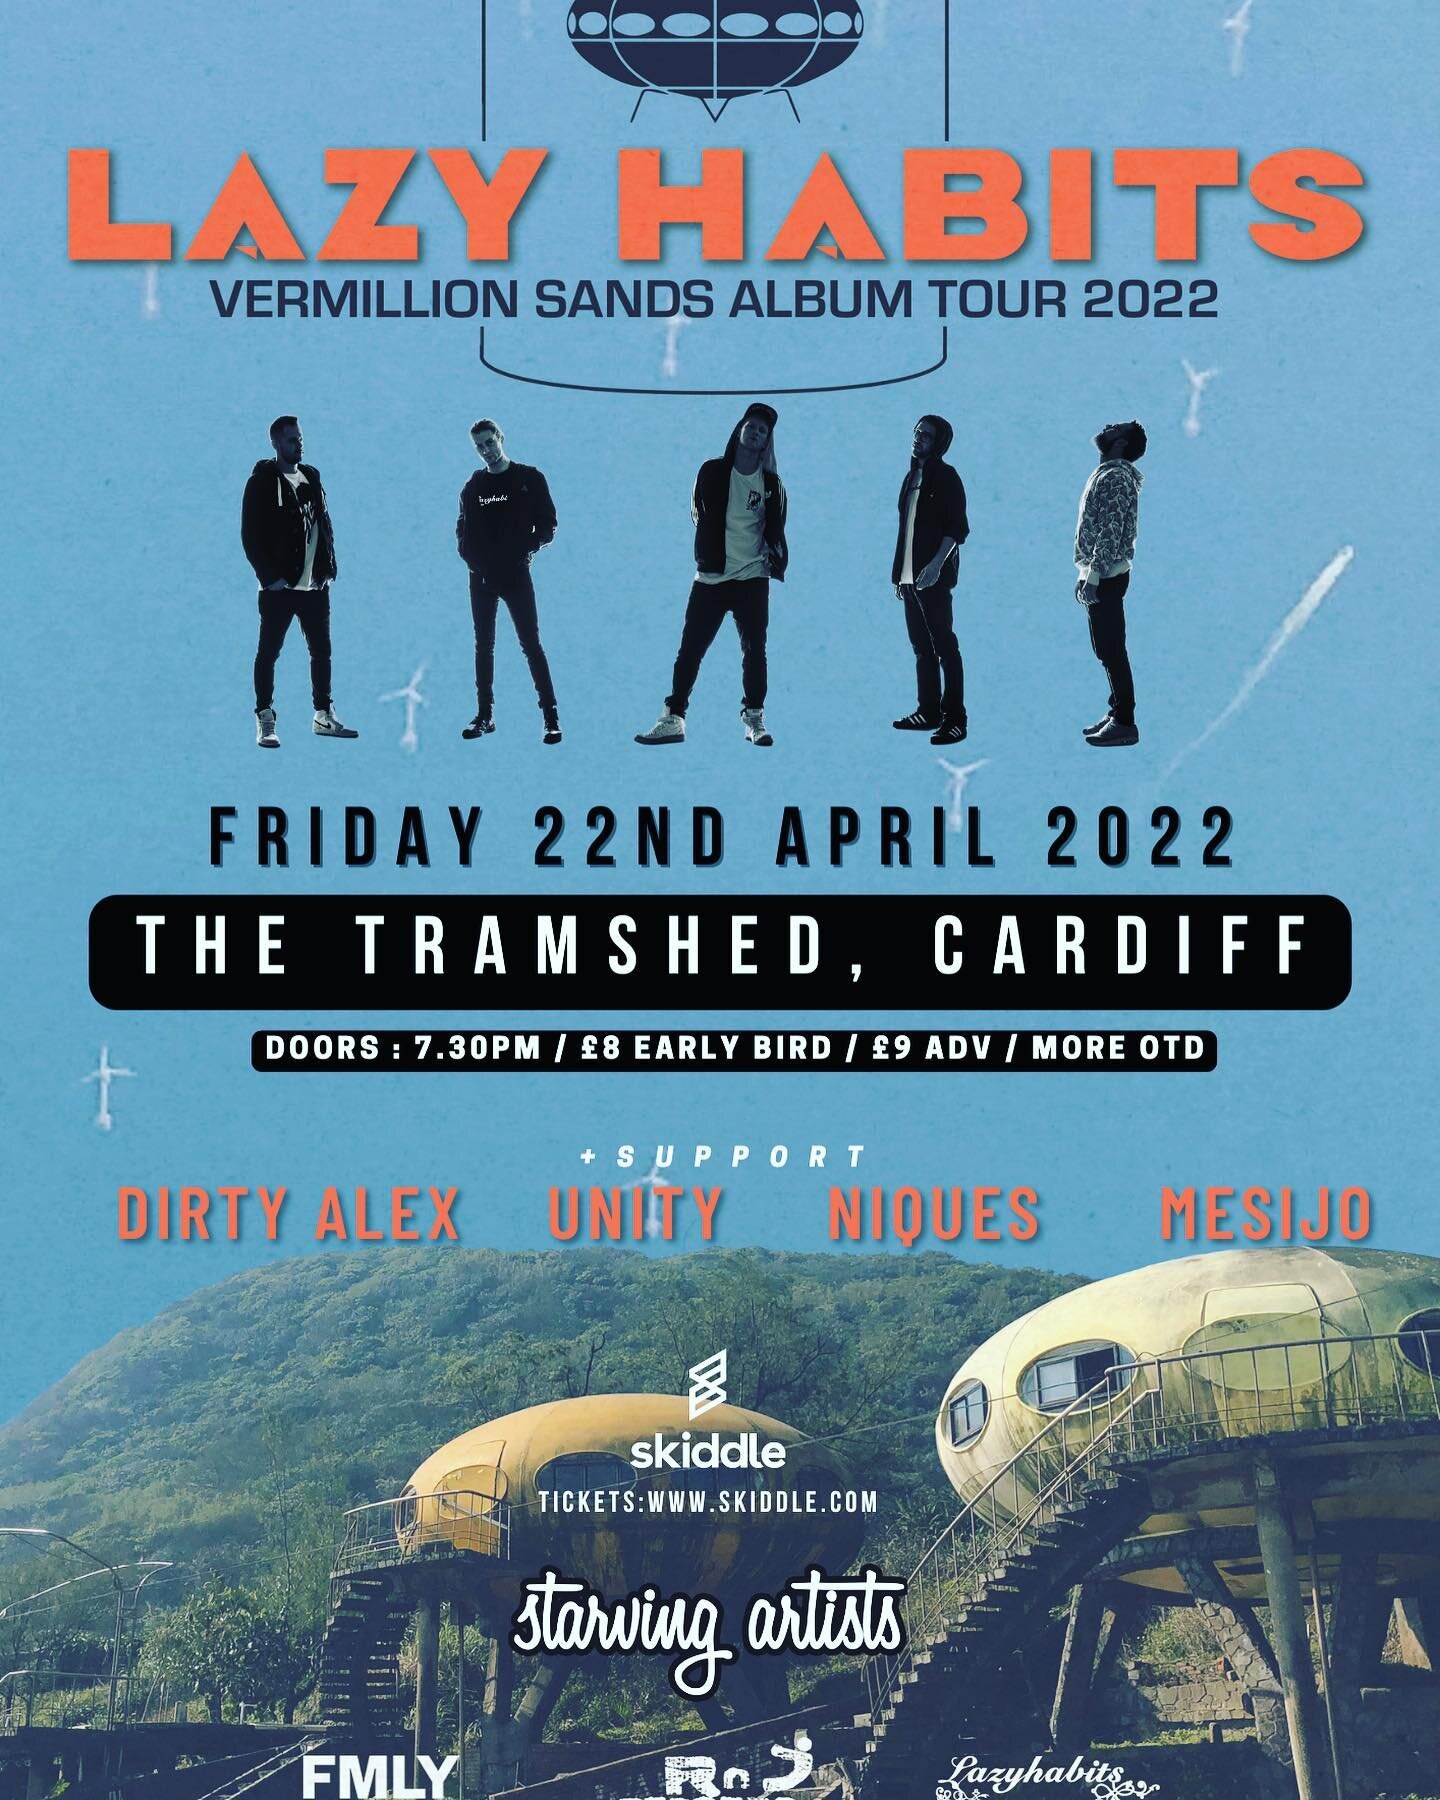 2 months to go til&rsquo; the mighty @lazyhabits return to @tramshedcardiff with a brand new album! 🔥
Plus support from @dirty_alex_band @artbyunity @niquesspeaks @mesijo.official 
💥 Link for tickets in bio💥
.
.
.
.
.
#lazyhabits #vermillionsands 